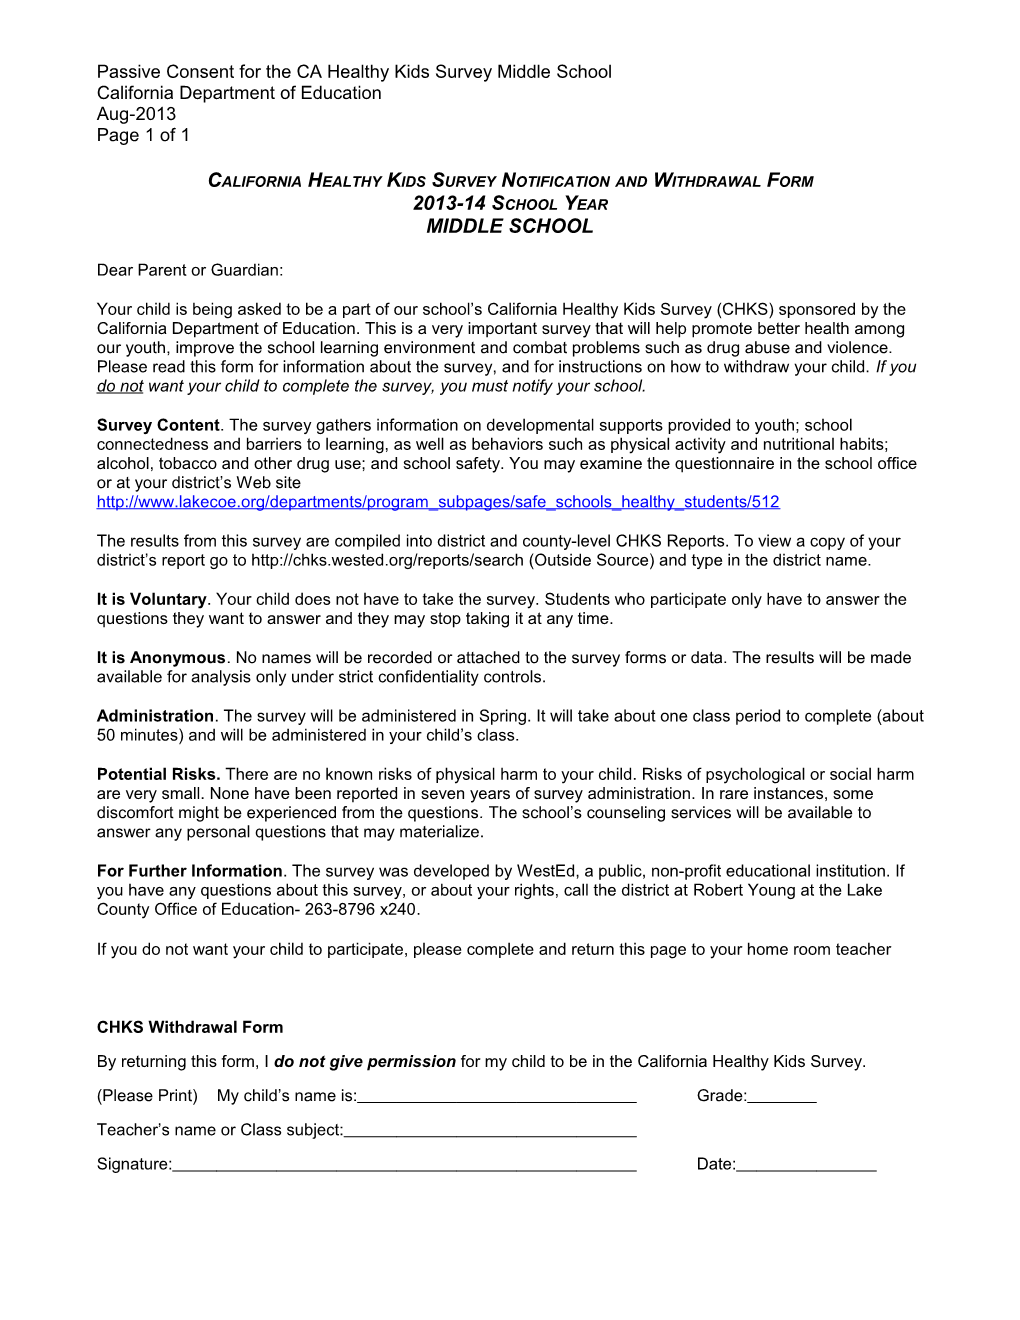 CHKS Passive Consent Form Middle School - Research (Ca Dept of Education) s1